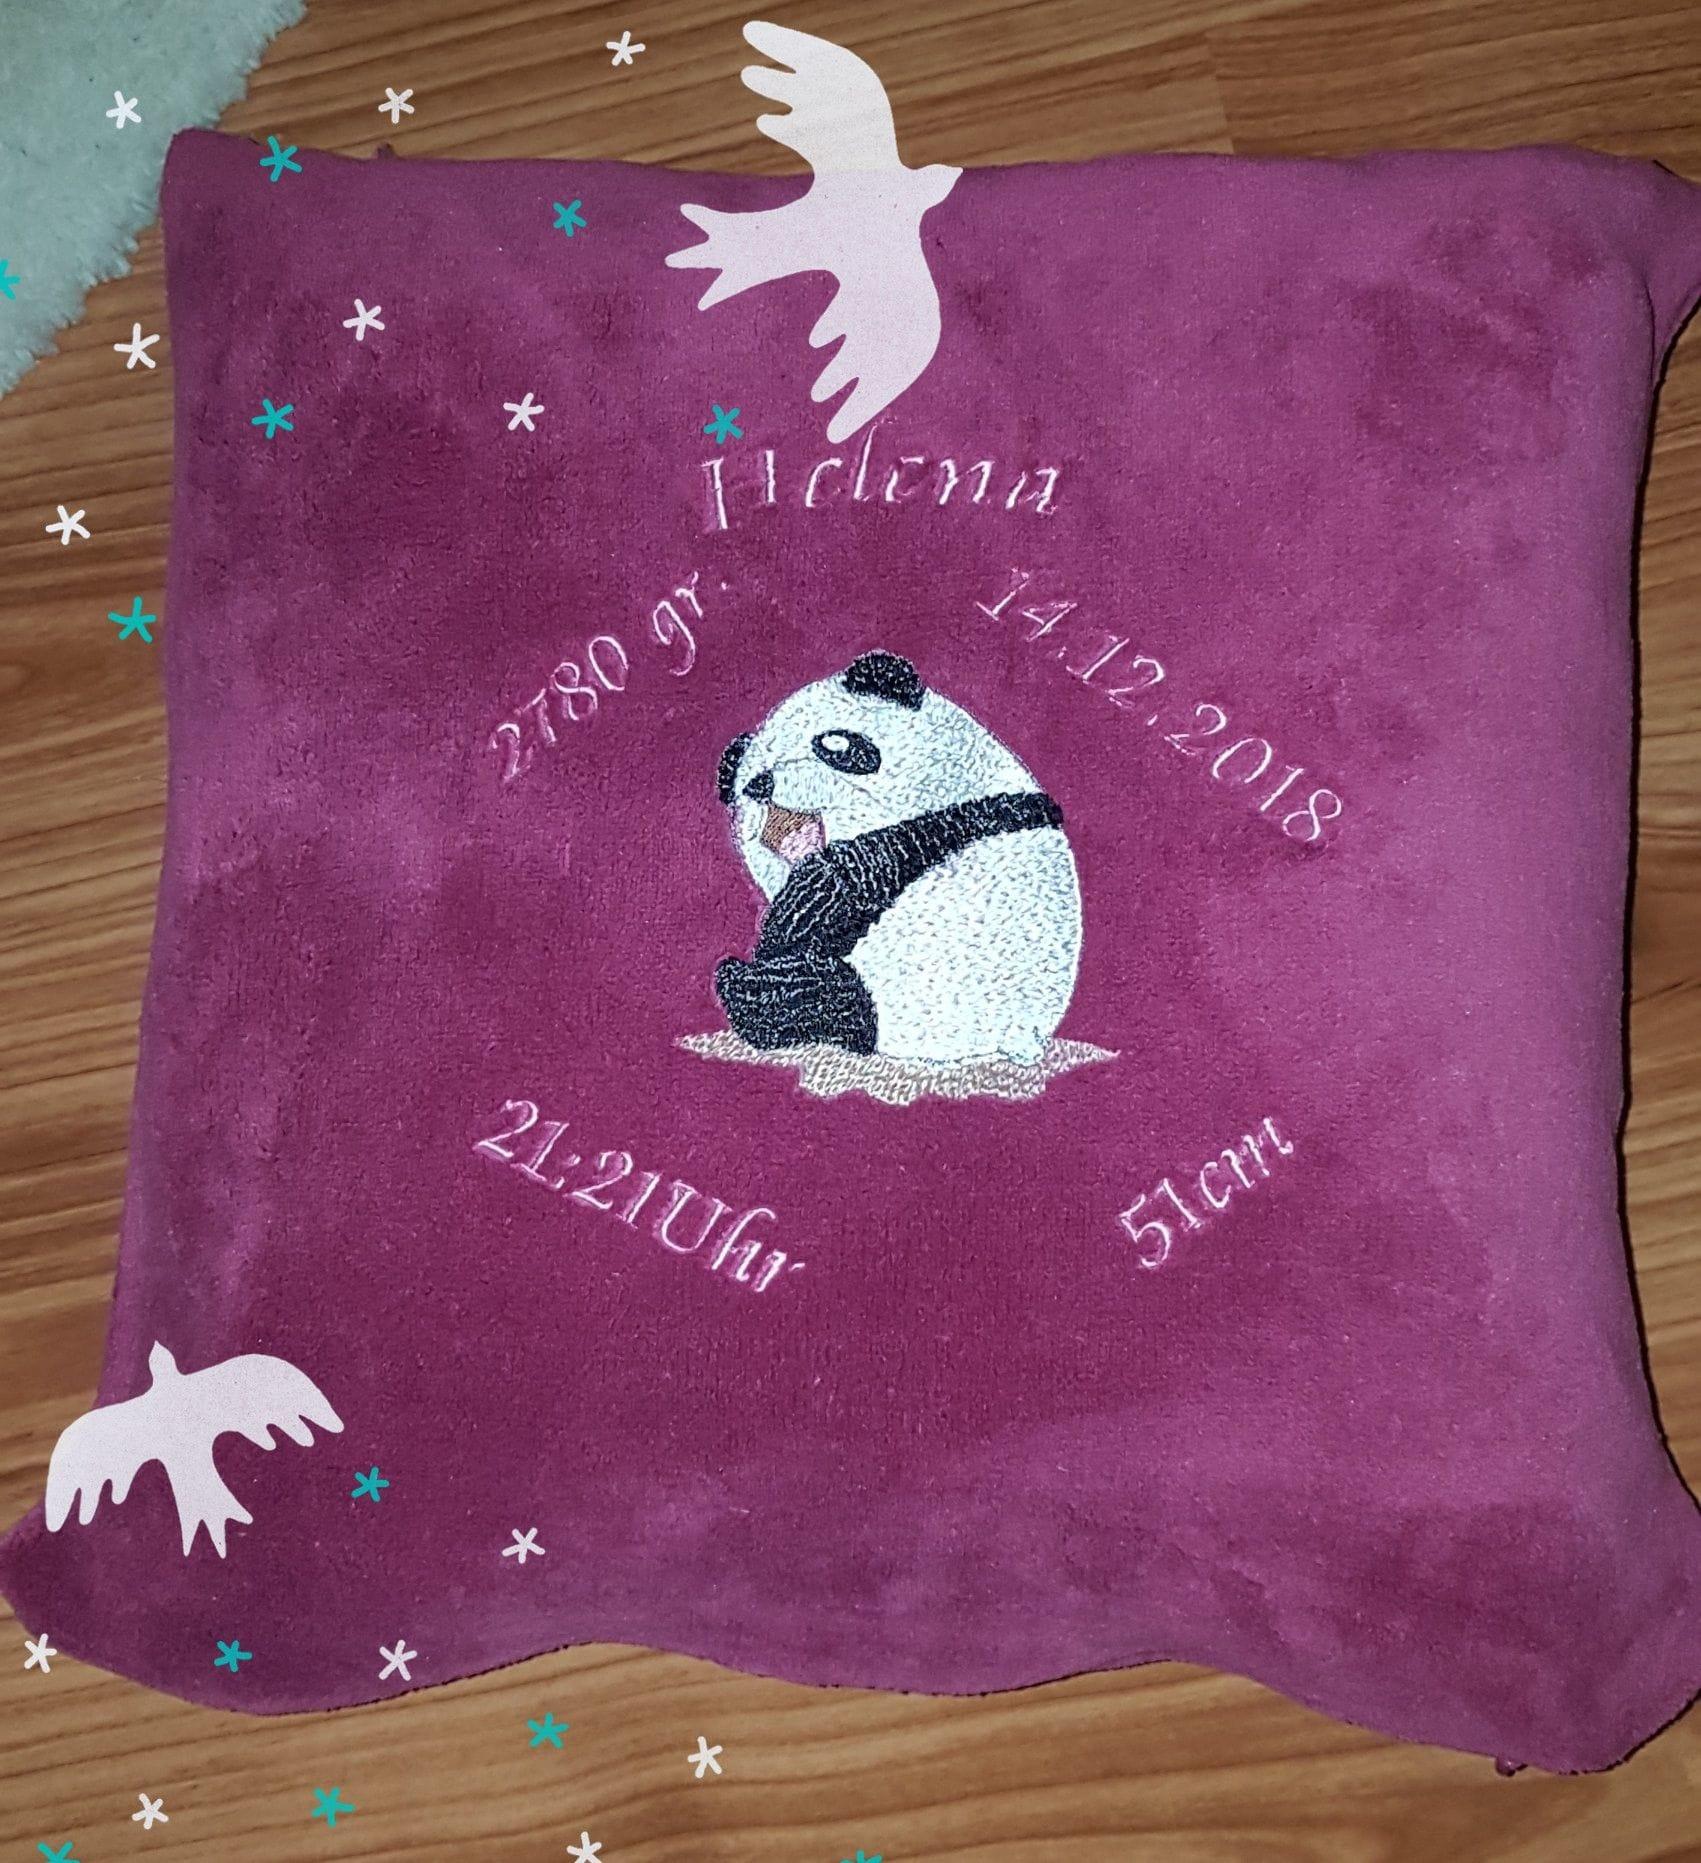 Embroidered cushion with Panda design